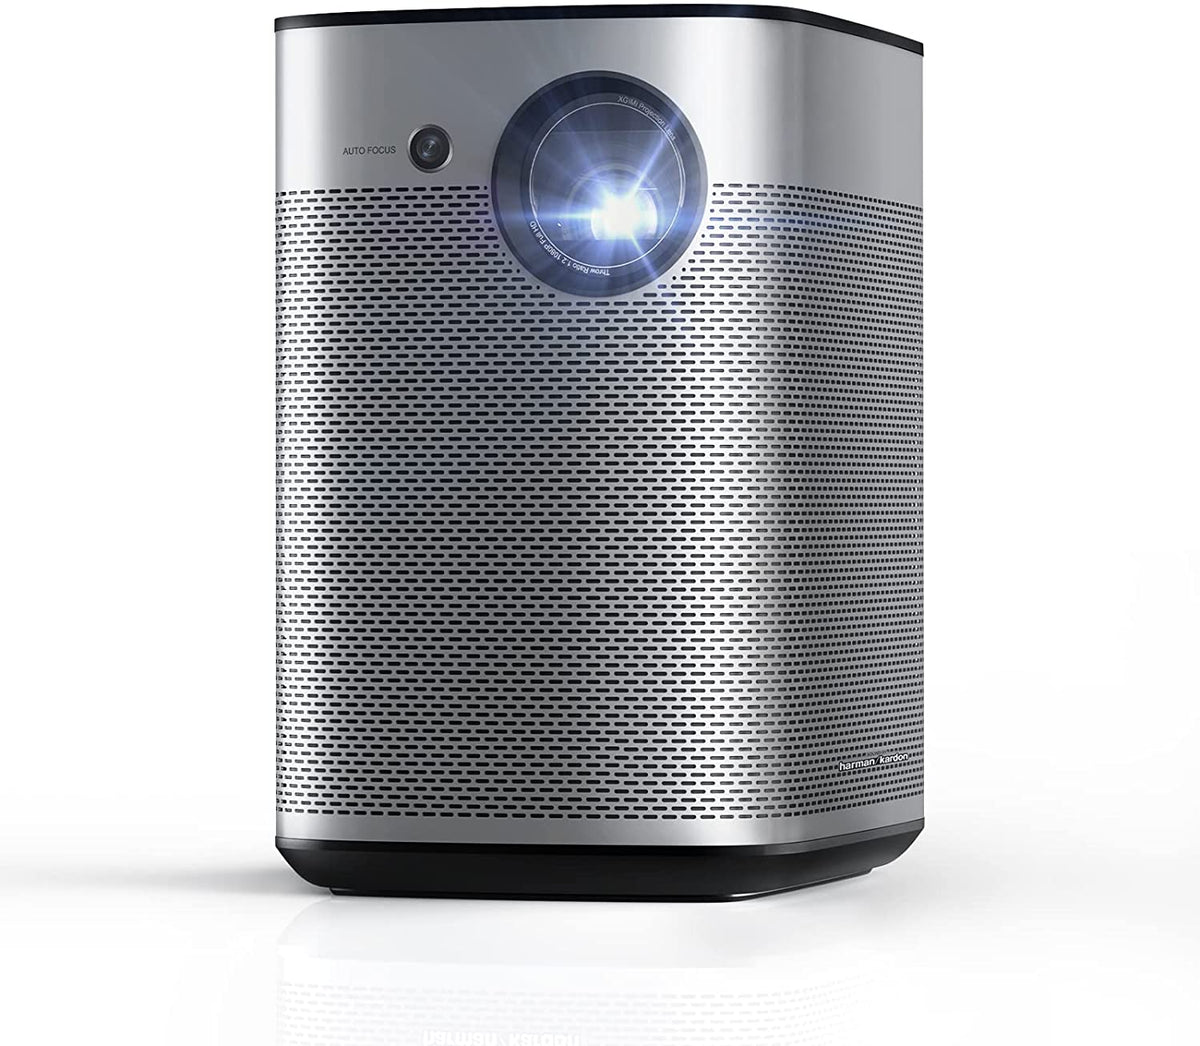 Harman Lumen, Native Kardon Speaker, 800 for & XGIMI Outdoor Home 4K Supported, Projector Halo ANSI 1080p Portable